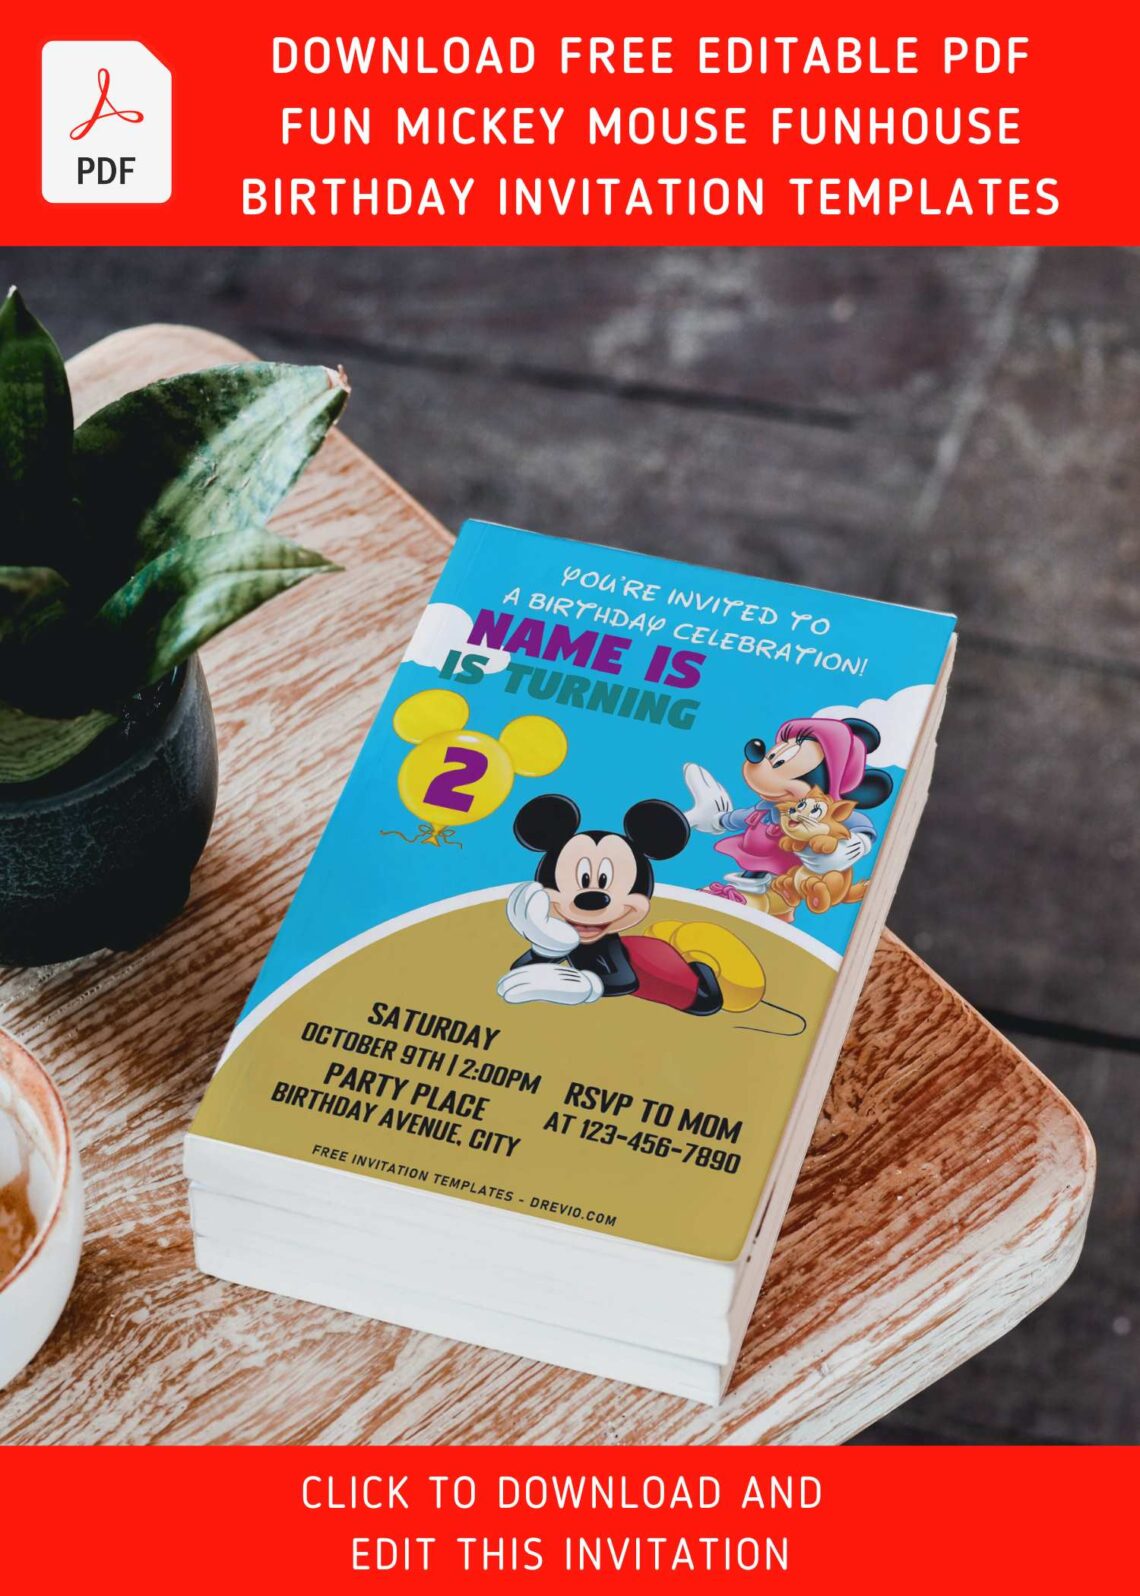 (Free Editable PDF) Ultimate Mickey Mouse Funhouse Birthday Invitation Templates with cute wordings